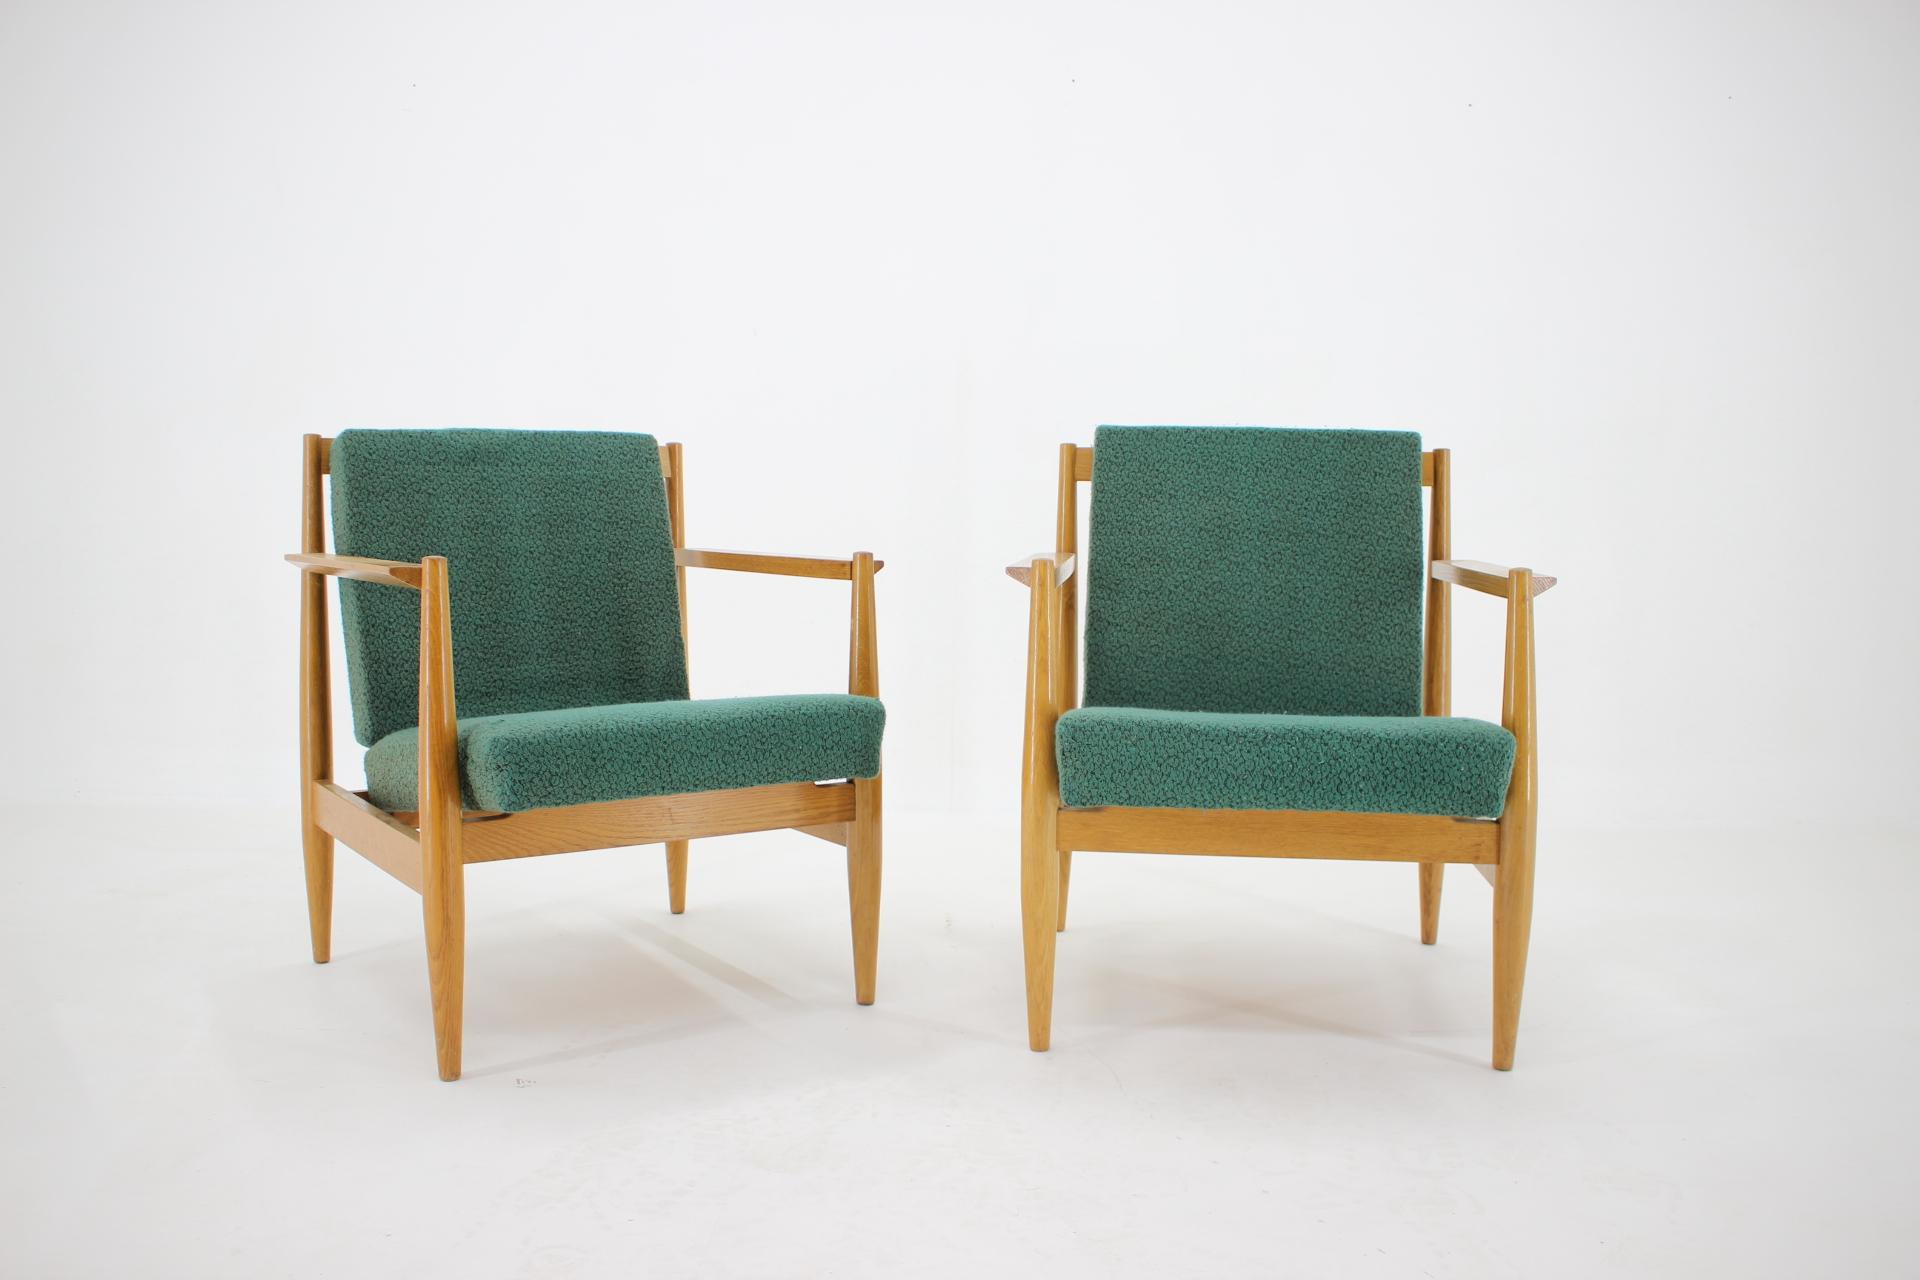 - Produced by Ton/Thonet czechoslovakia 
- Good original condition with minor signs of wear 
- The wooden parts has been repolished 
- The fabric has been cleaned
- High of seat 40 cm.